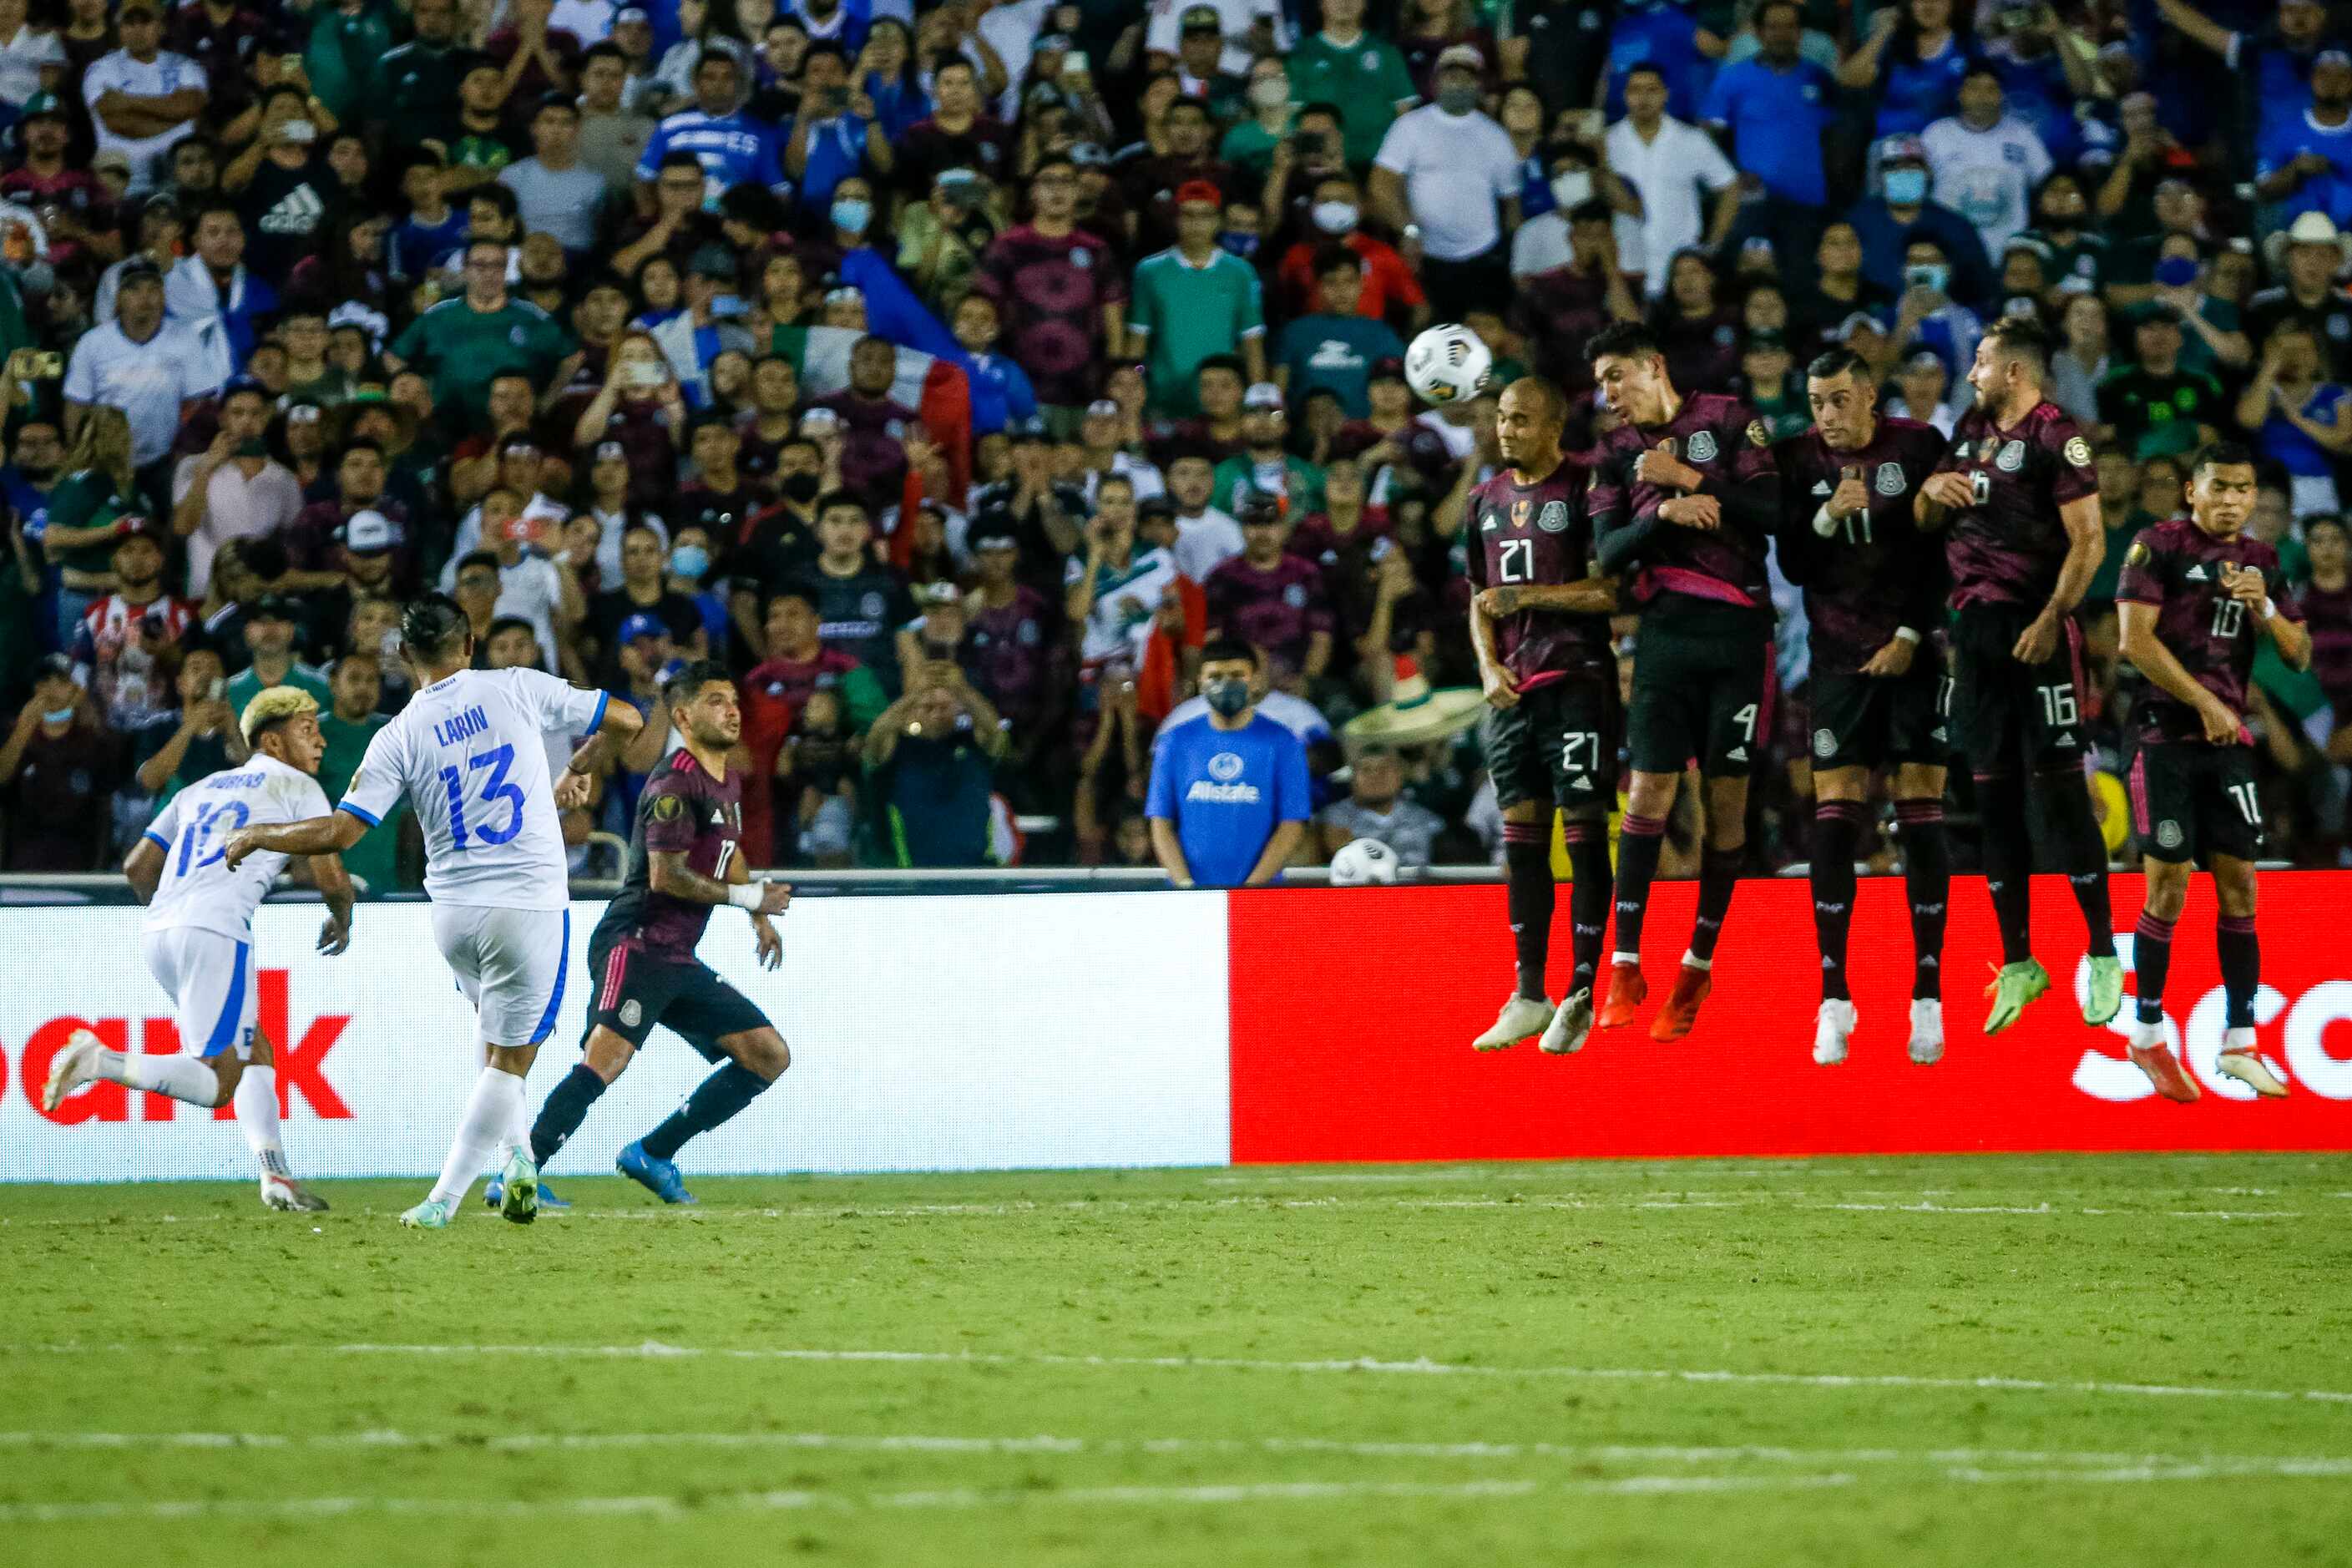 El Salvador defender Alexander Larín (13) attempts a free kick over the leaping wall of the...